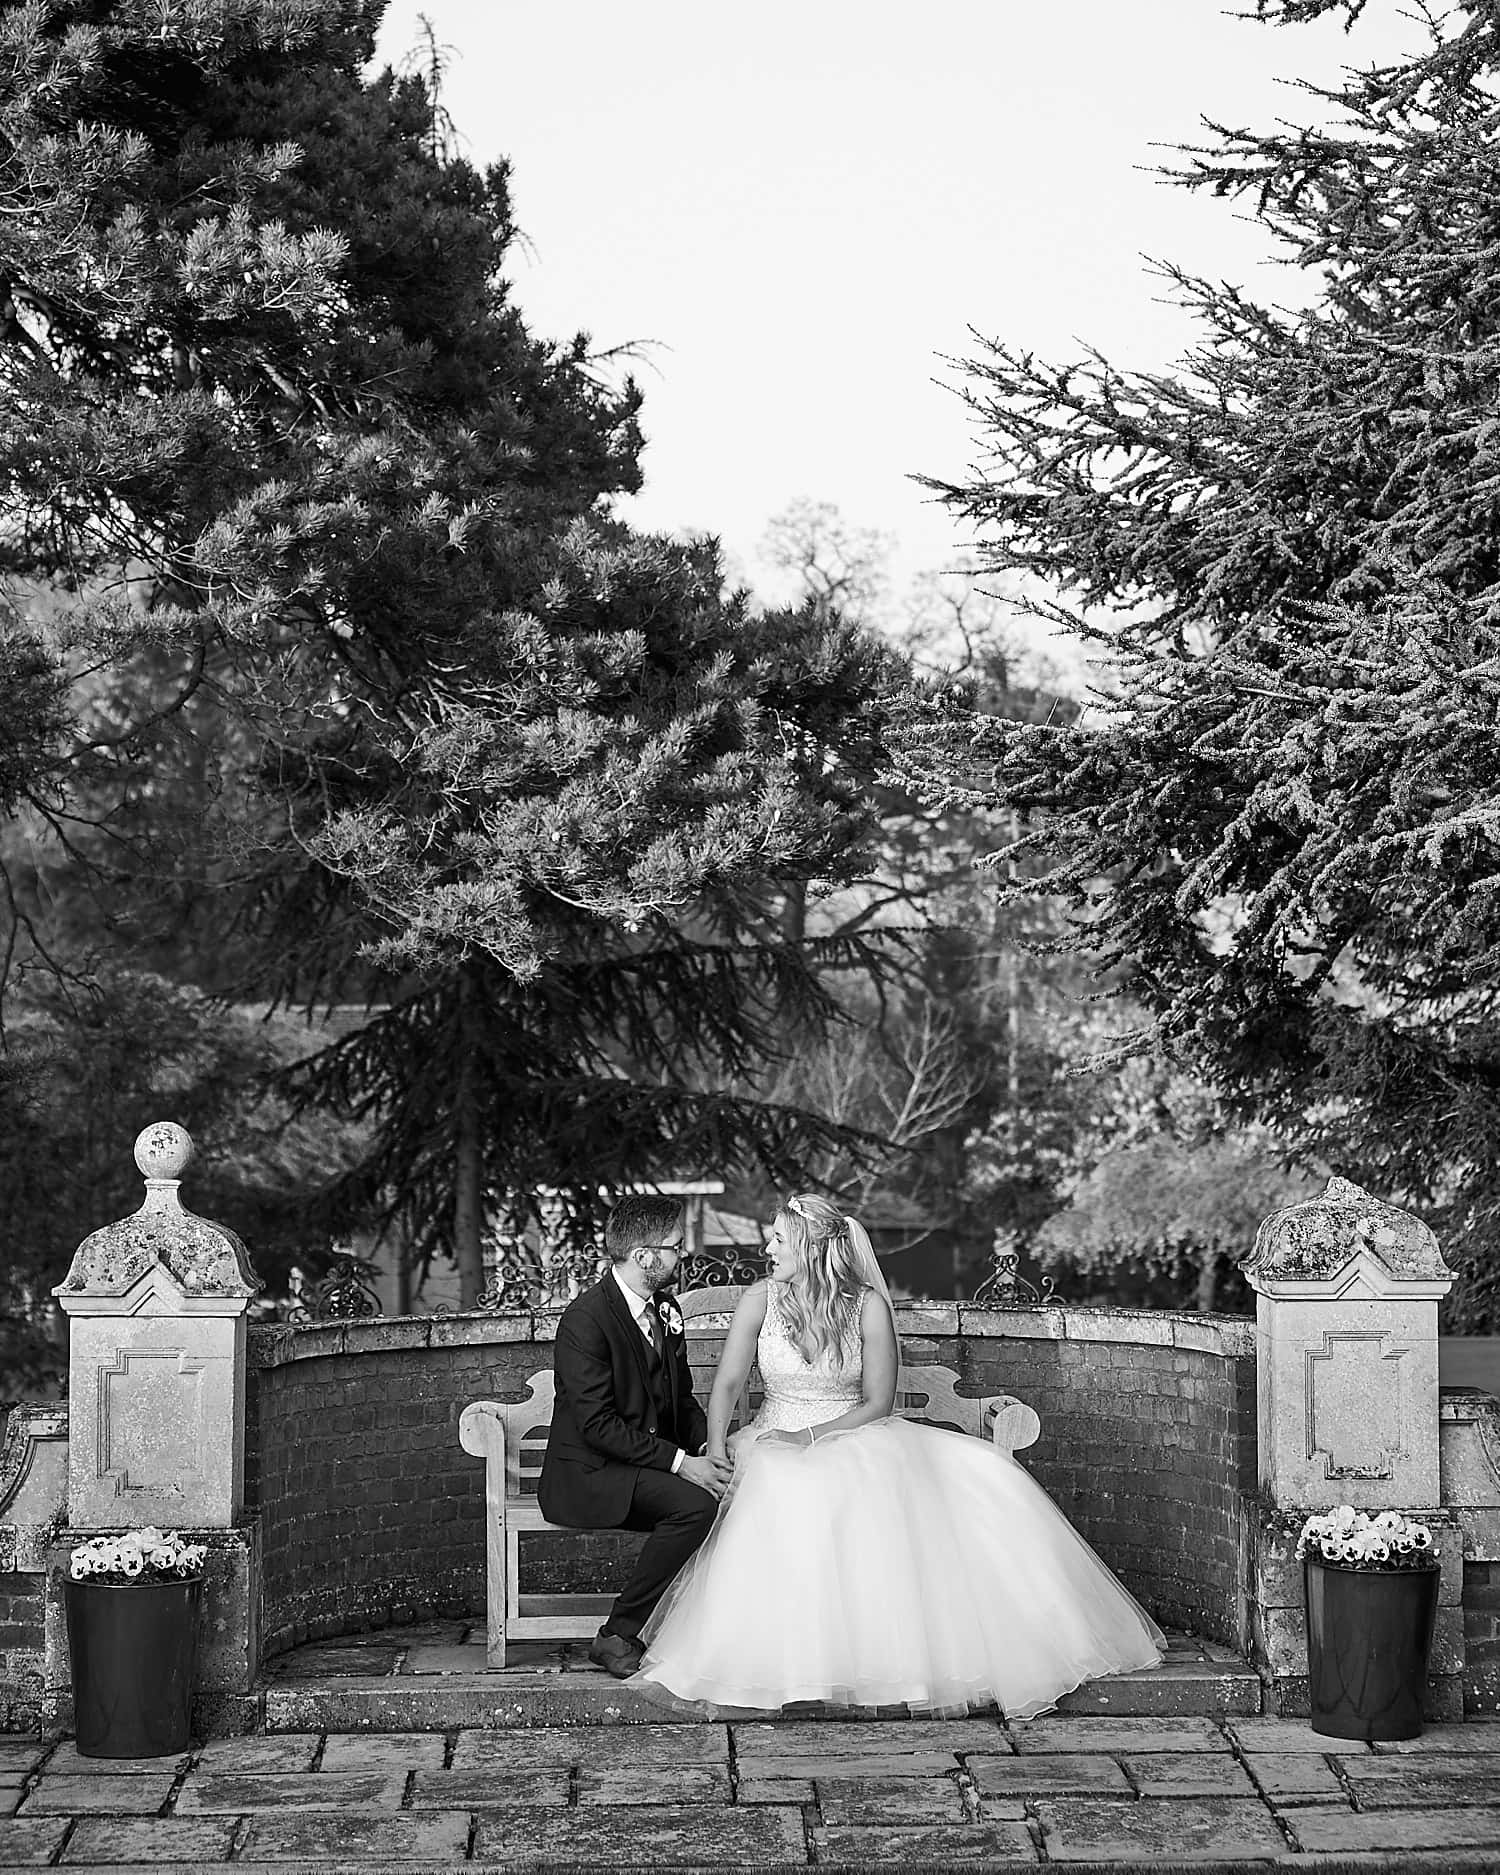 A couple chat on a bench during their wedding day. 